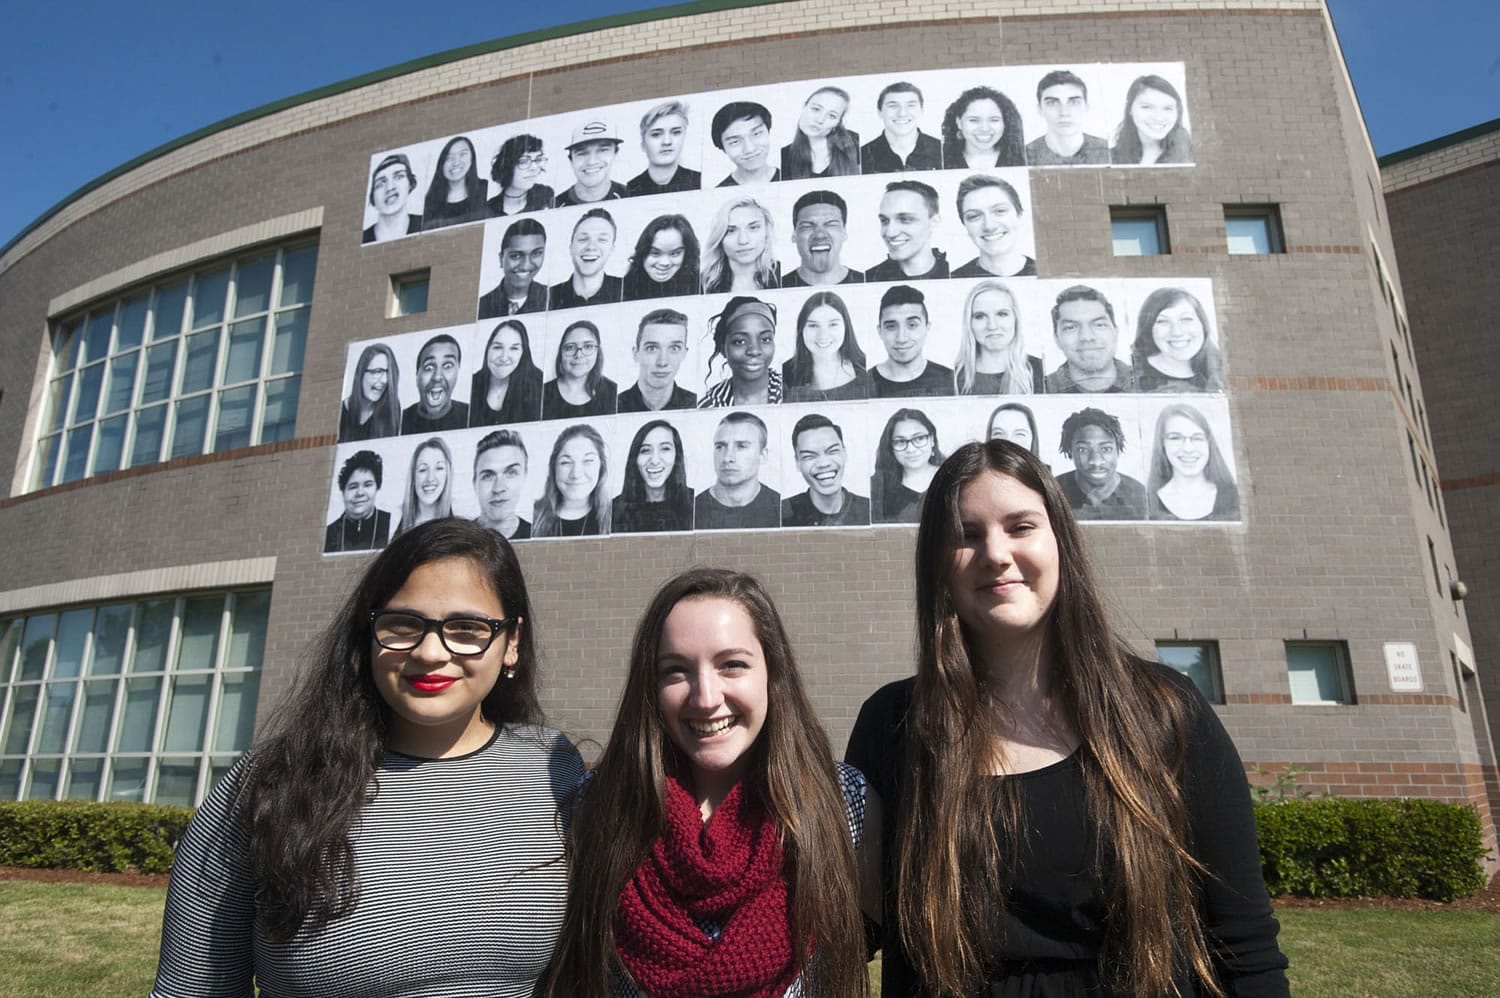 At Skyview High School, behind student photographers Rubyna Ali, from left, Shelby Sherman and Marta Alcazar, are the 40 portraits they selected to represent the school's diversity.